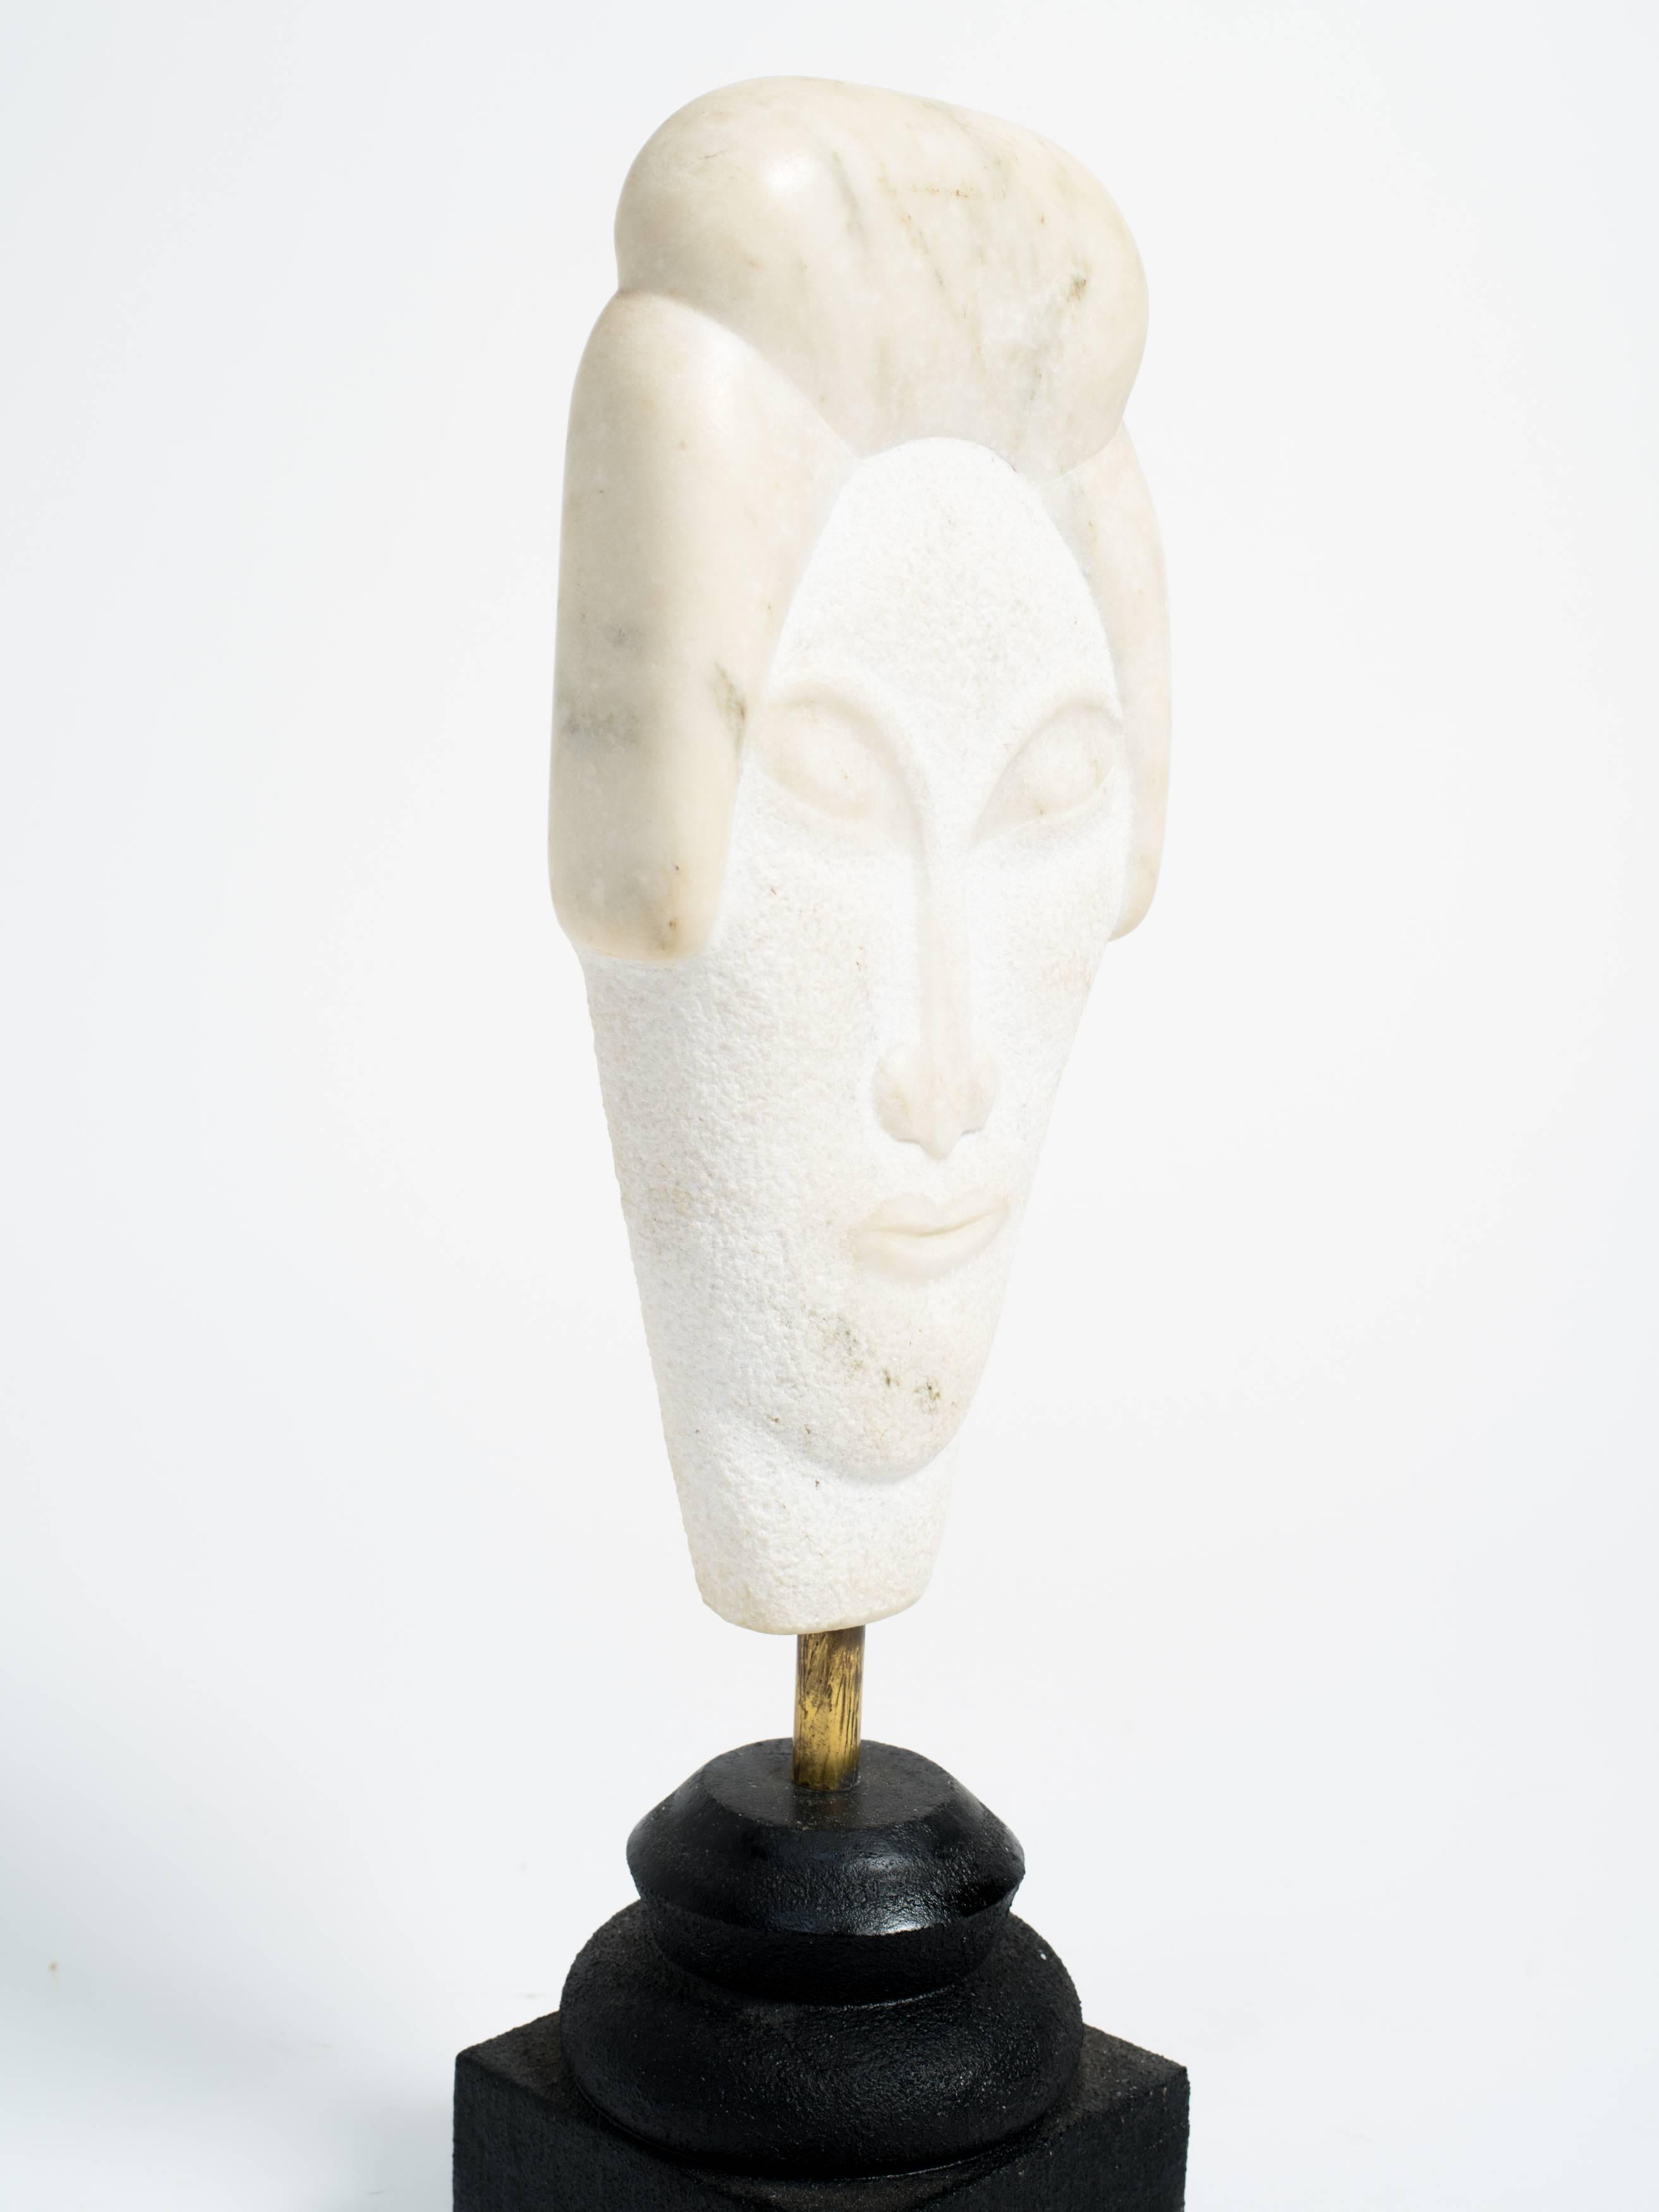 Asian marble bust sculpture on wood base.